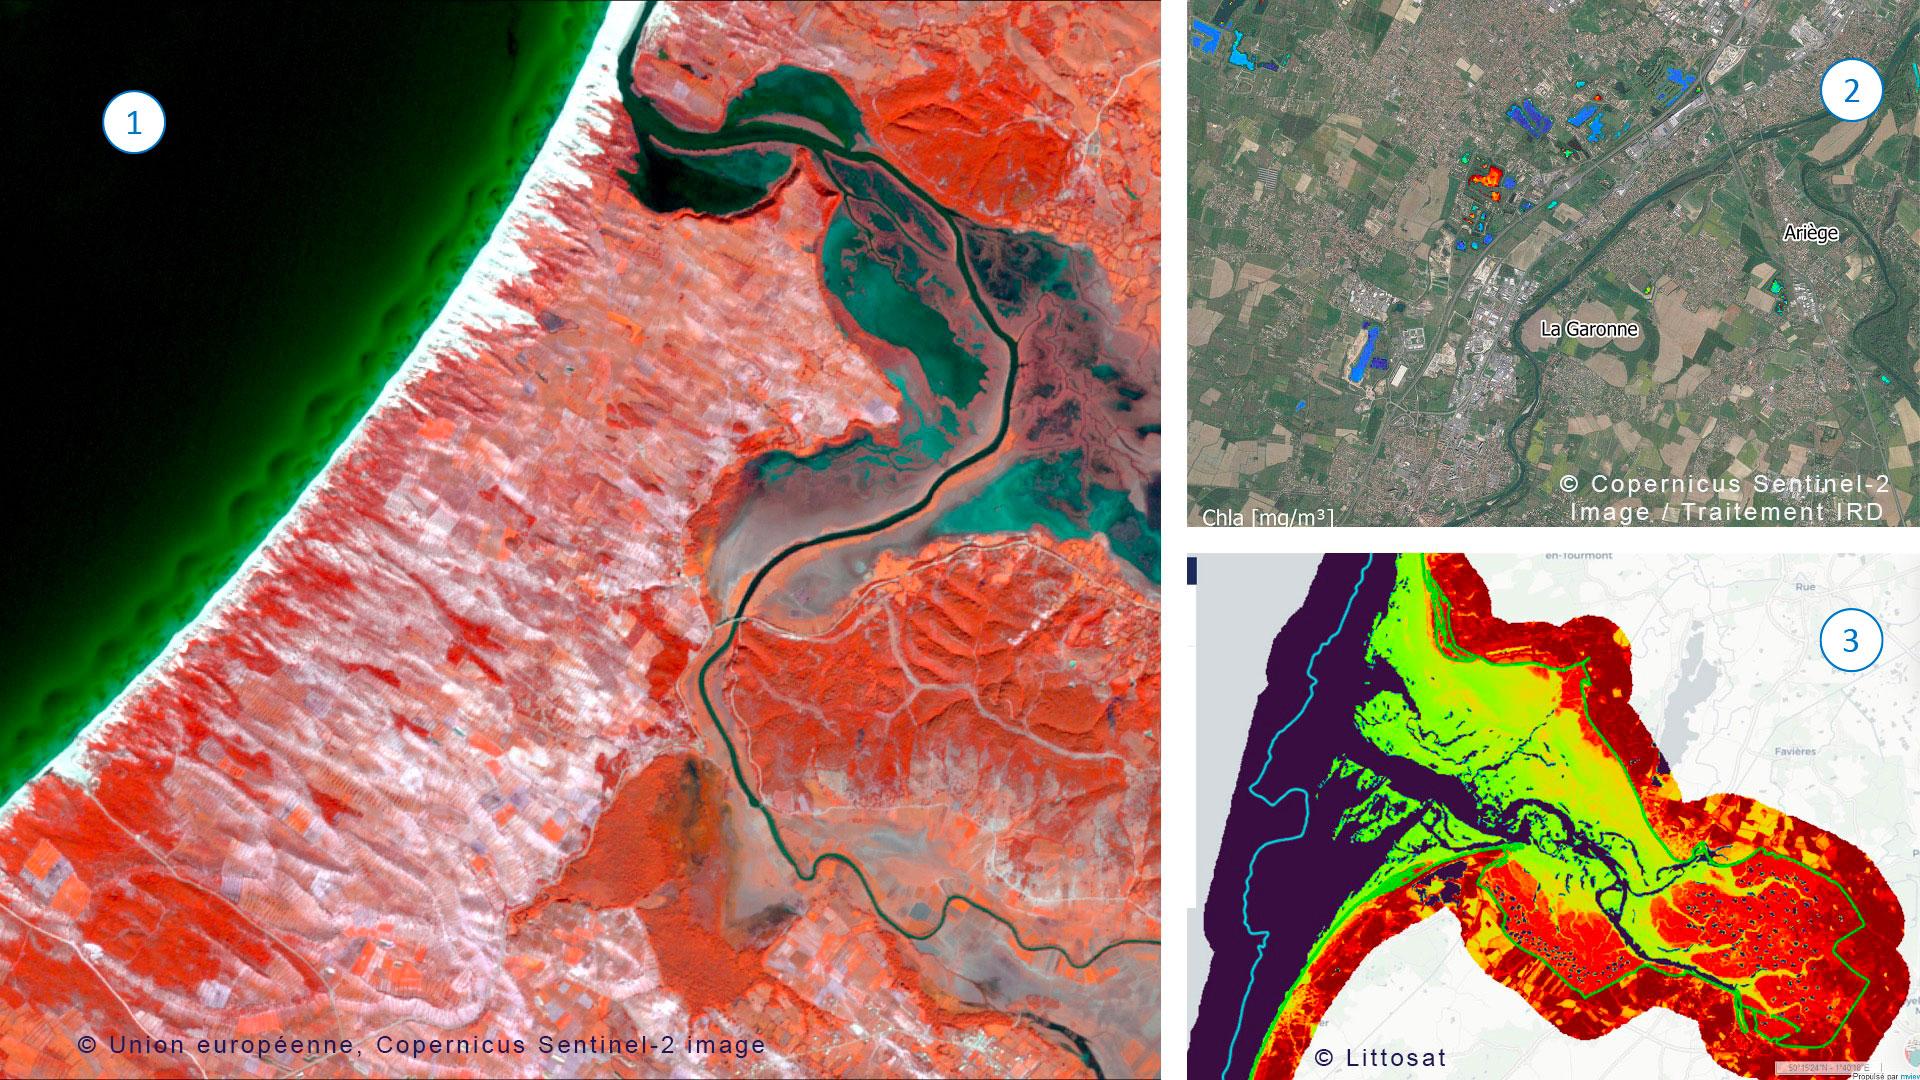 Different uses of Sentinel-2 imagery (by SCO projects): 1 to monitor the state of wetlands (AionWetlands), 2 to estimate the quality of small water reservoirs (XtremQuality), and 3 to map marine and coastal habitats (Littosat)